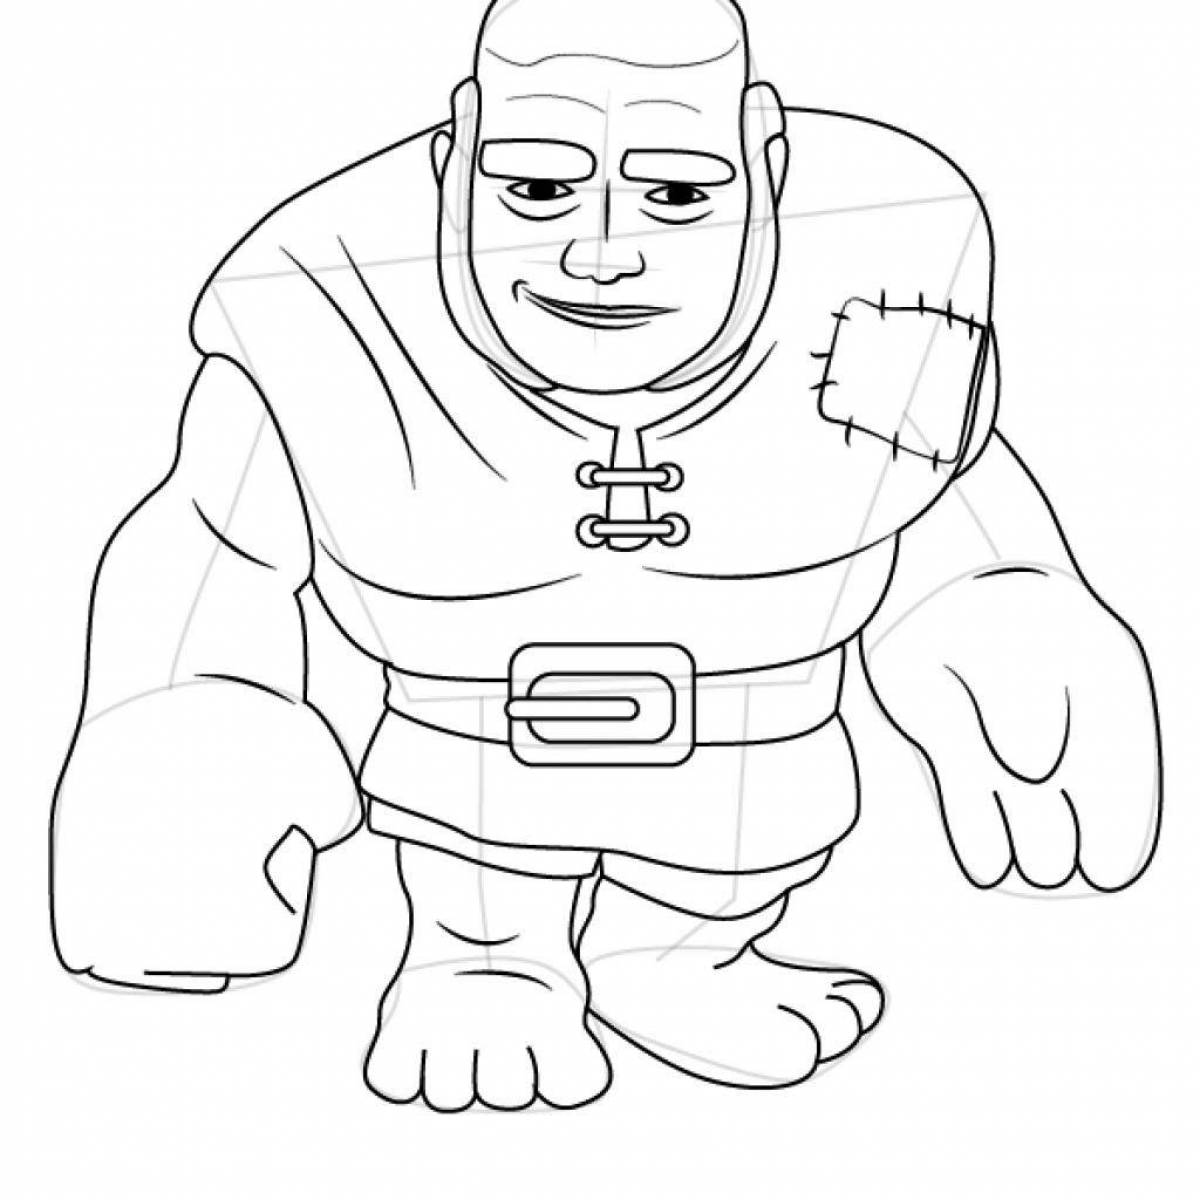 Charming clash of clans coloring book